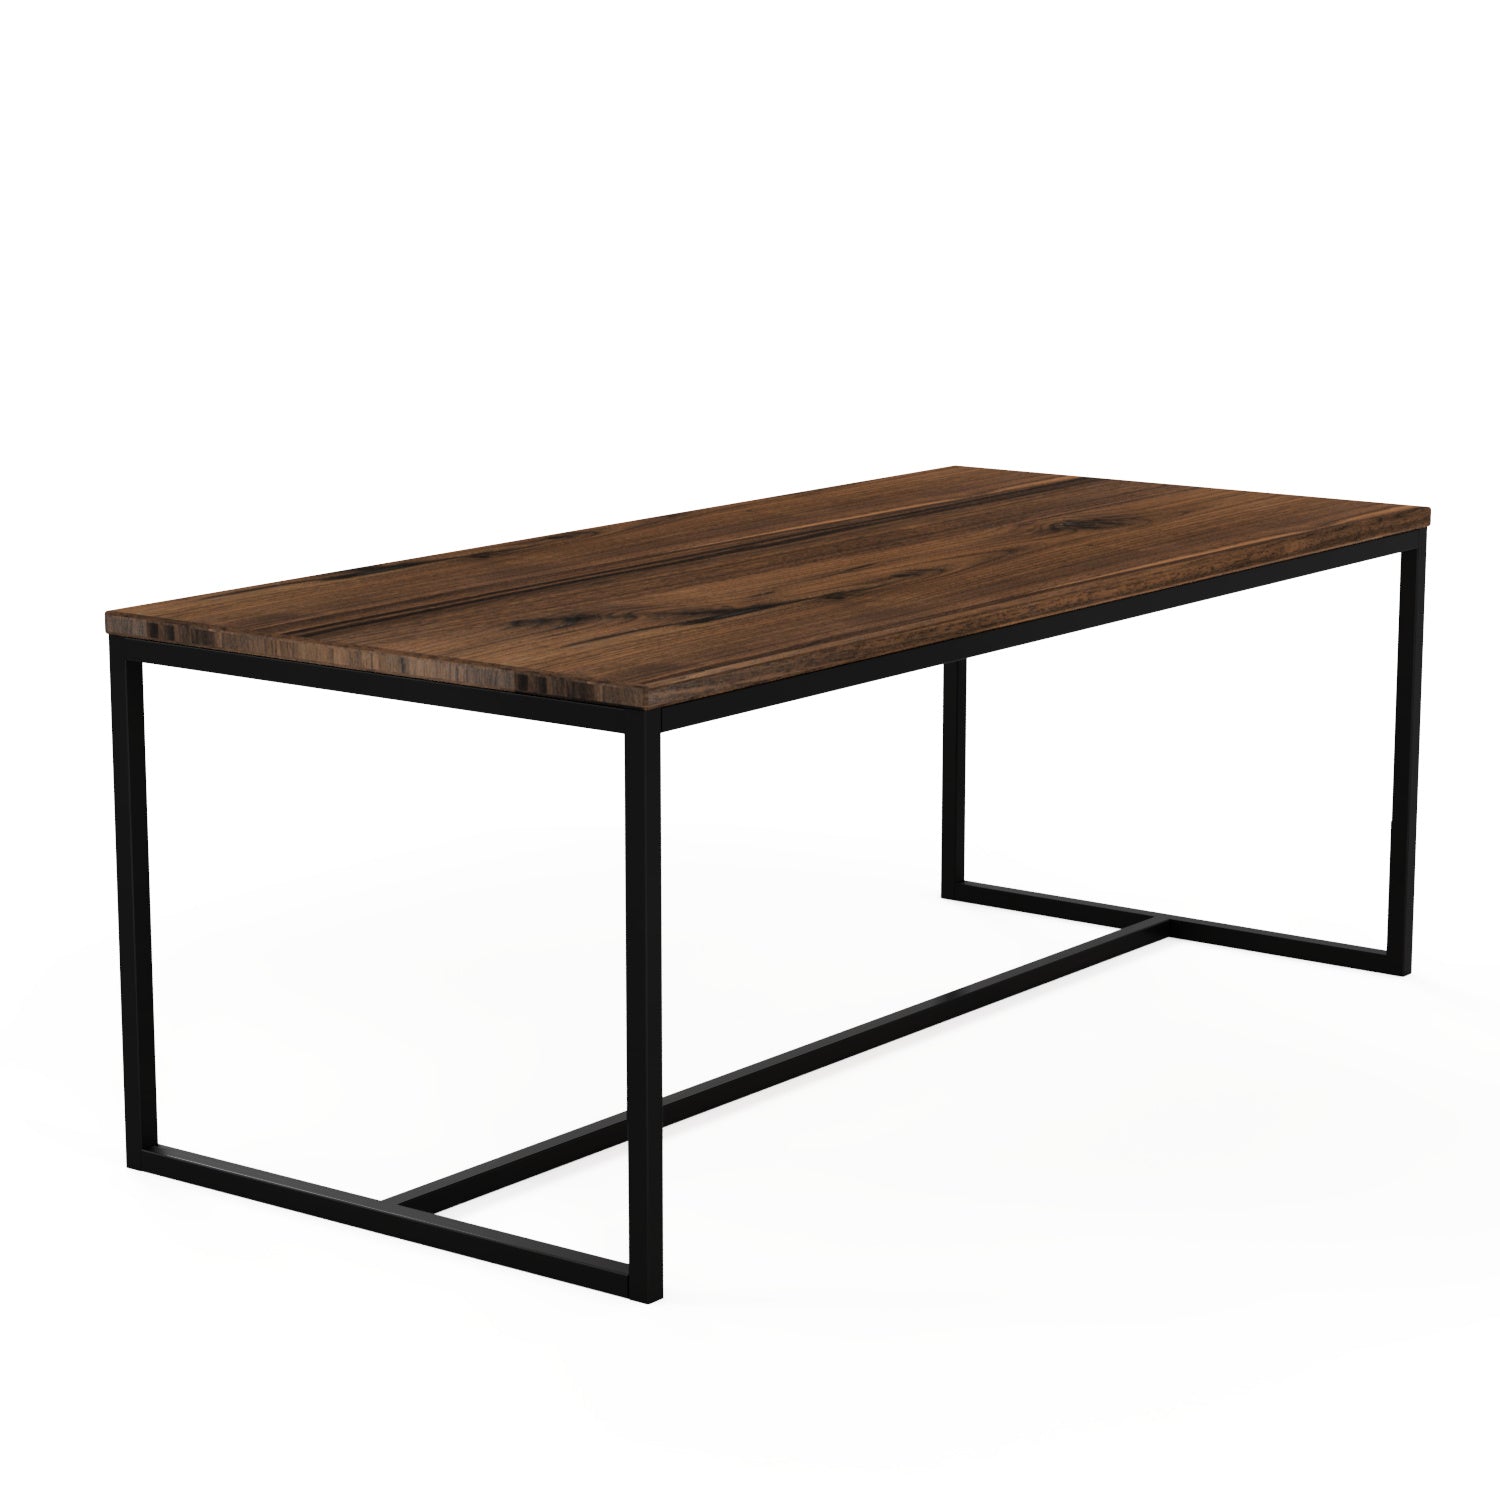 The Sedona Dining Table - FargoWoodworks